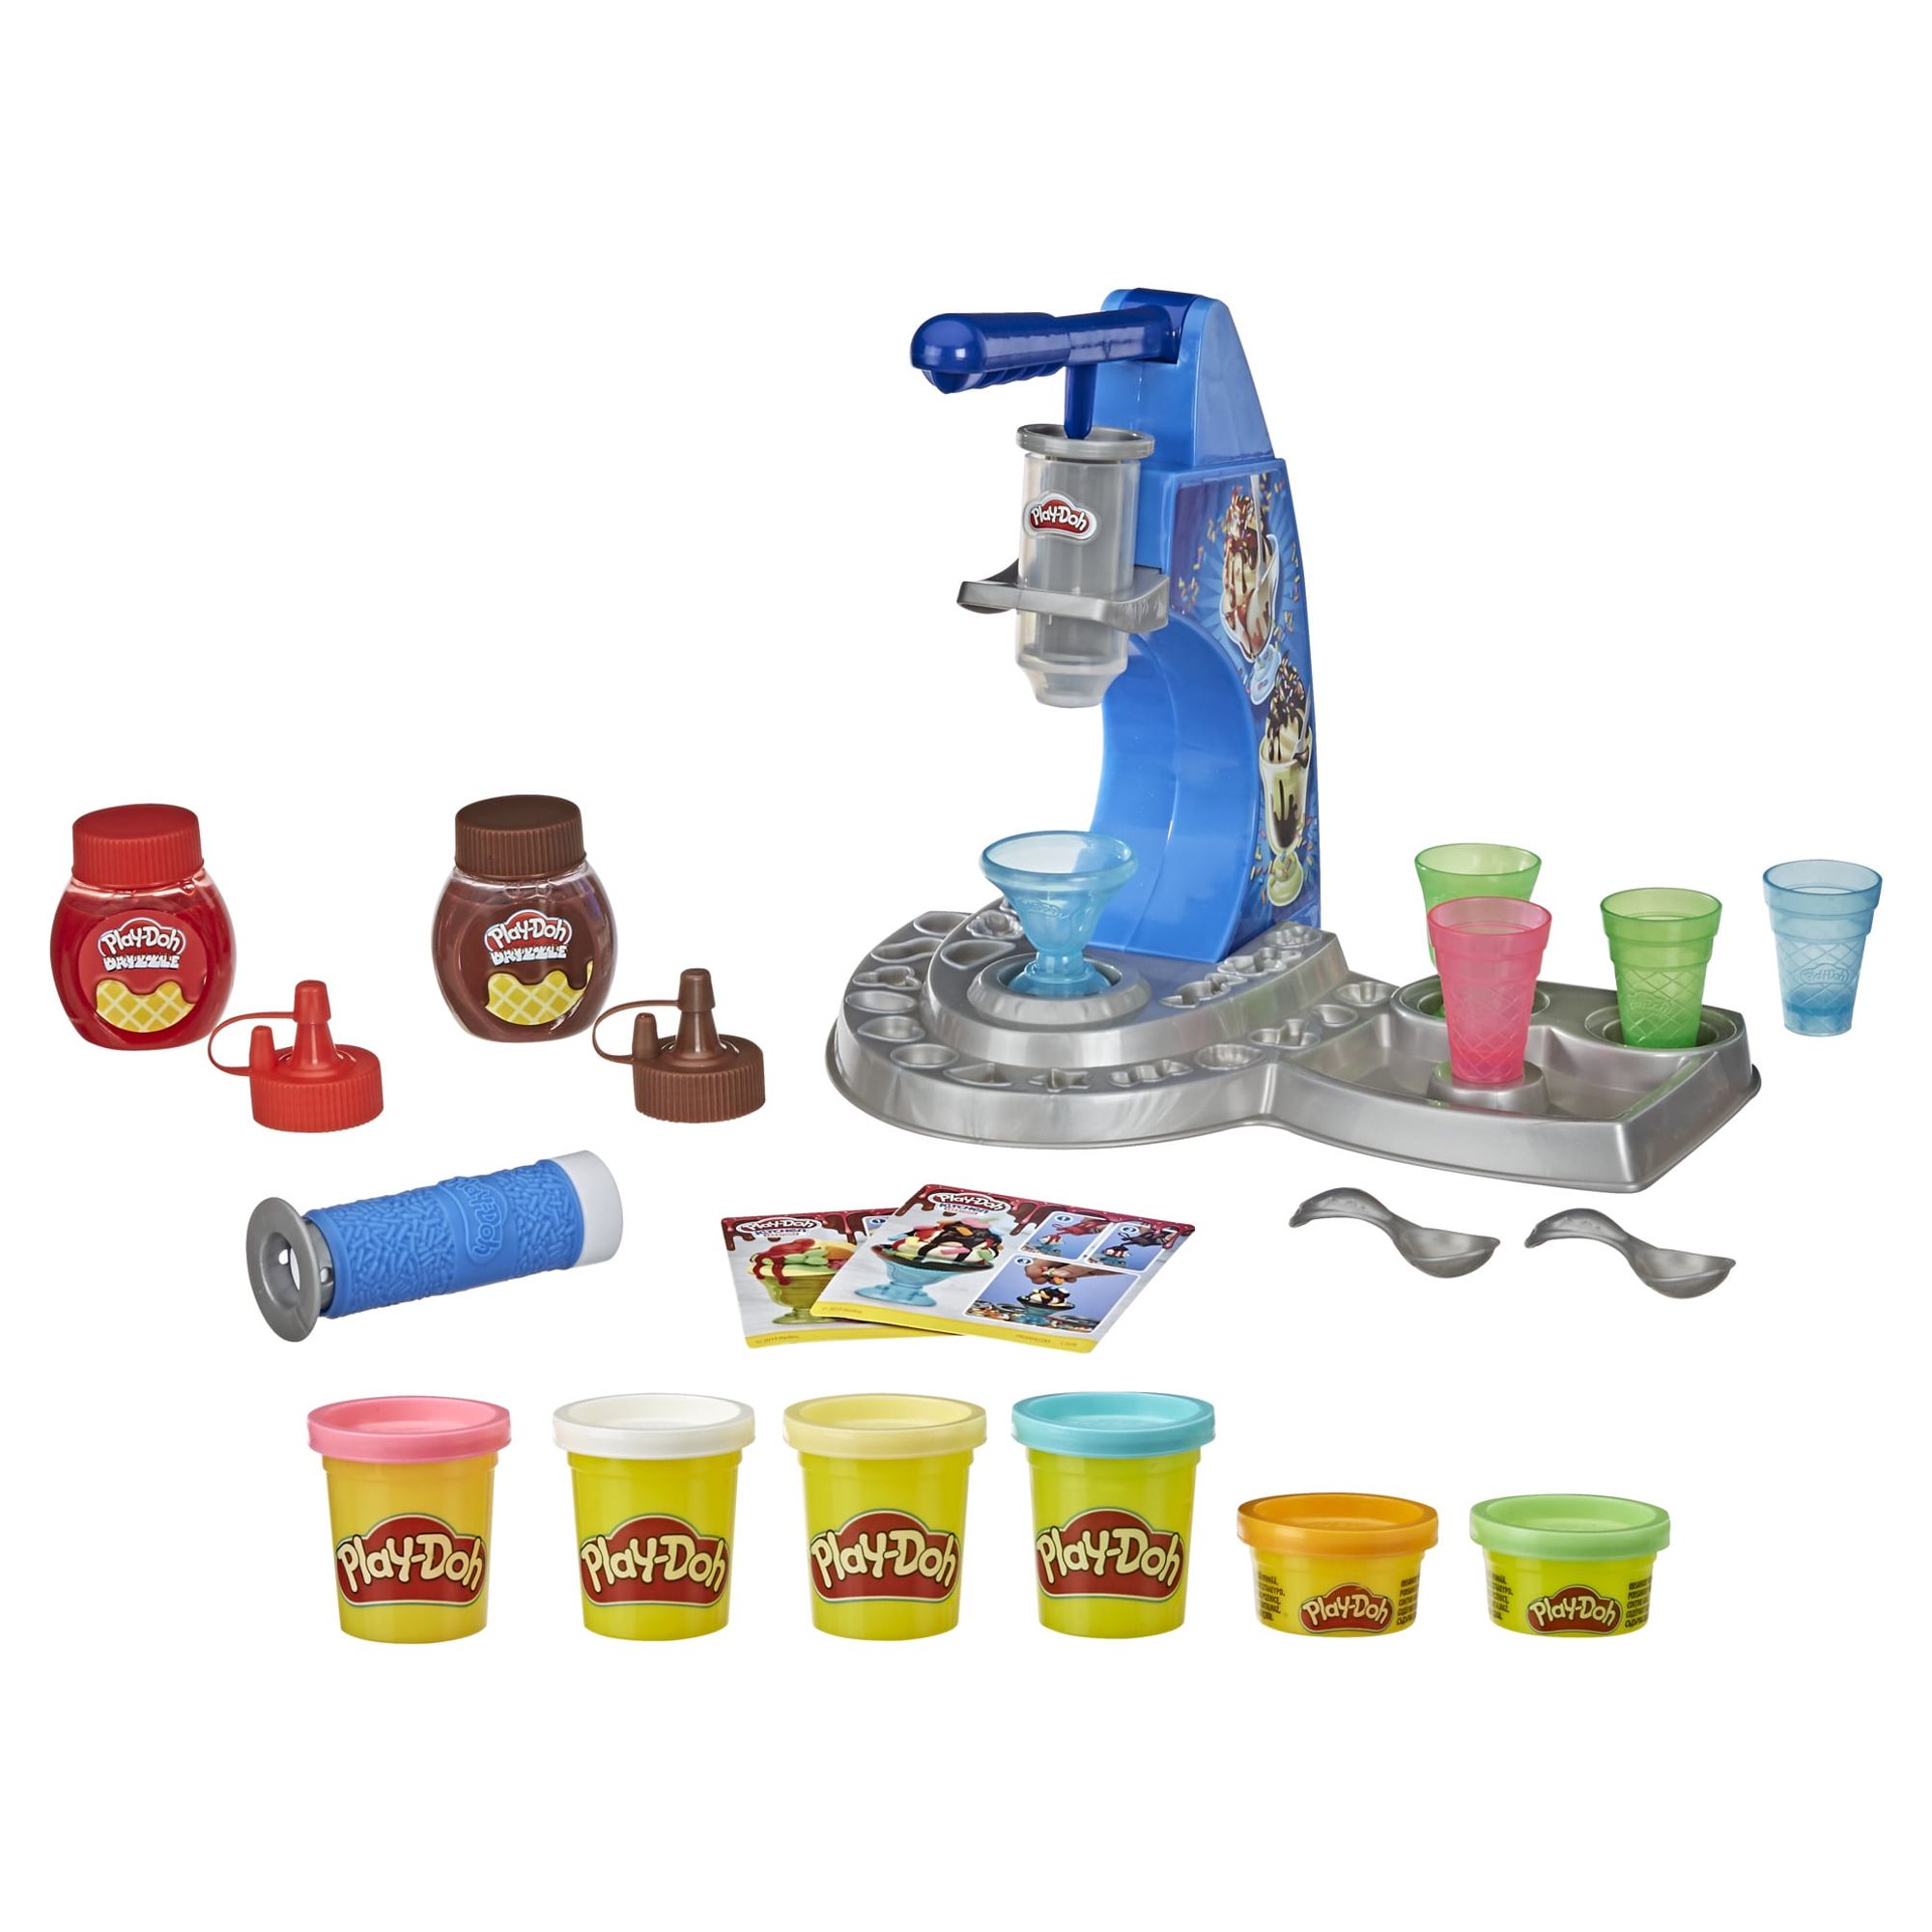 Play-Doh Kitchen Creations Drizzy Ice Cream Play Dough Set - 6 Color (6 Piece) - image 2 of 11